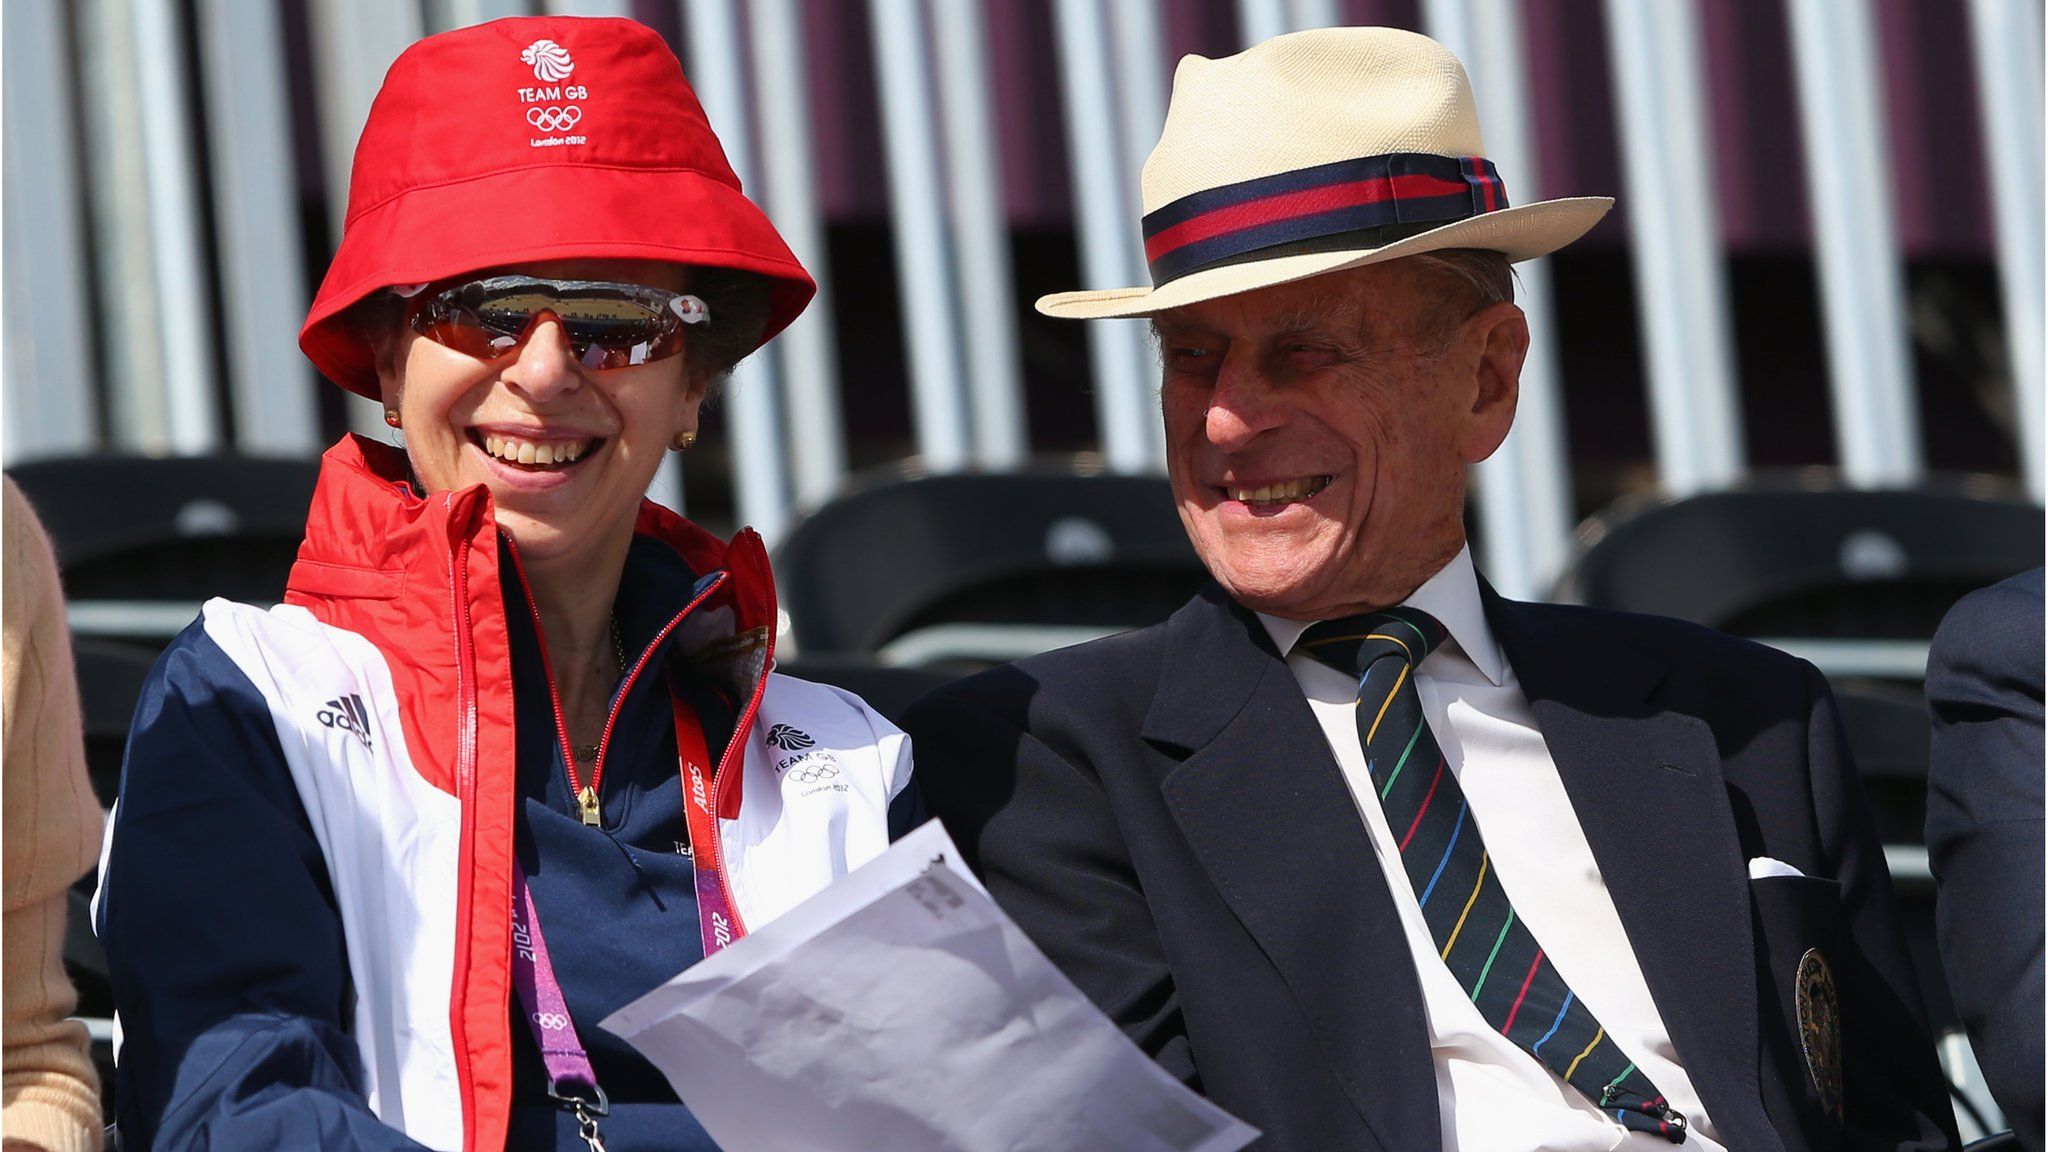 Princess Anne and the Duke of Edinburgh at the London 2012 Olympic Games